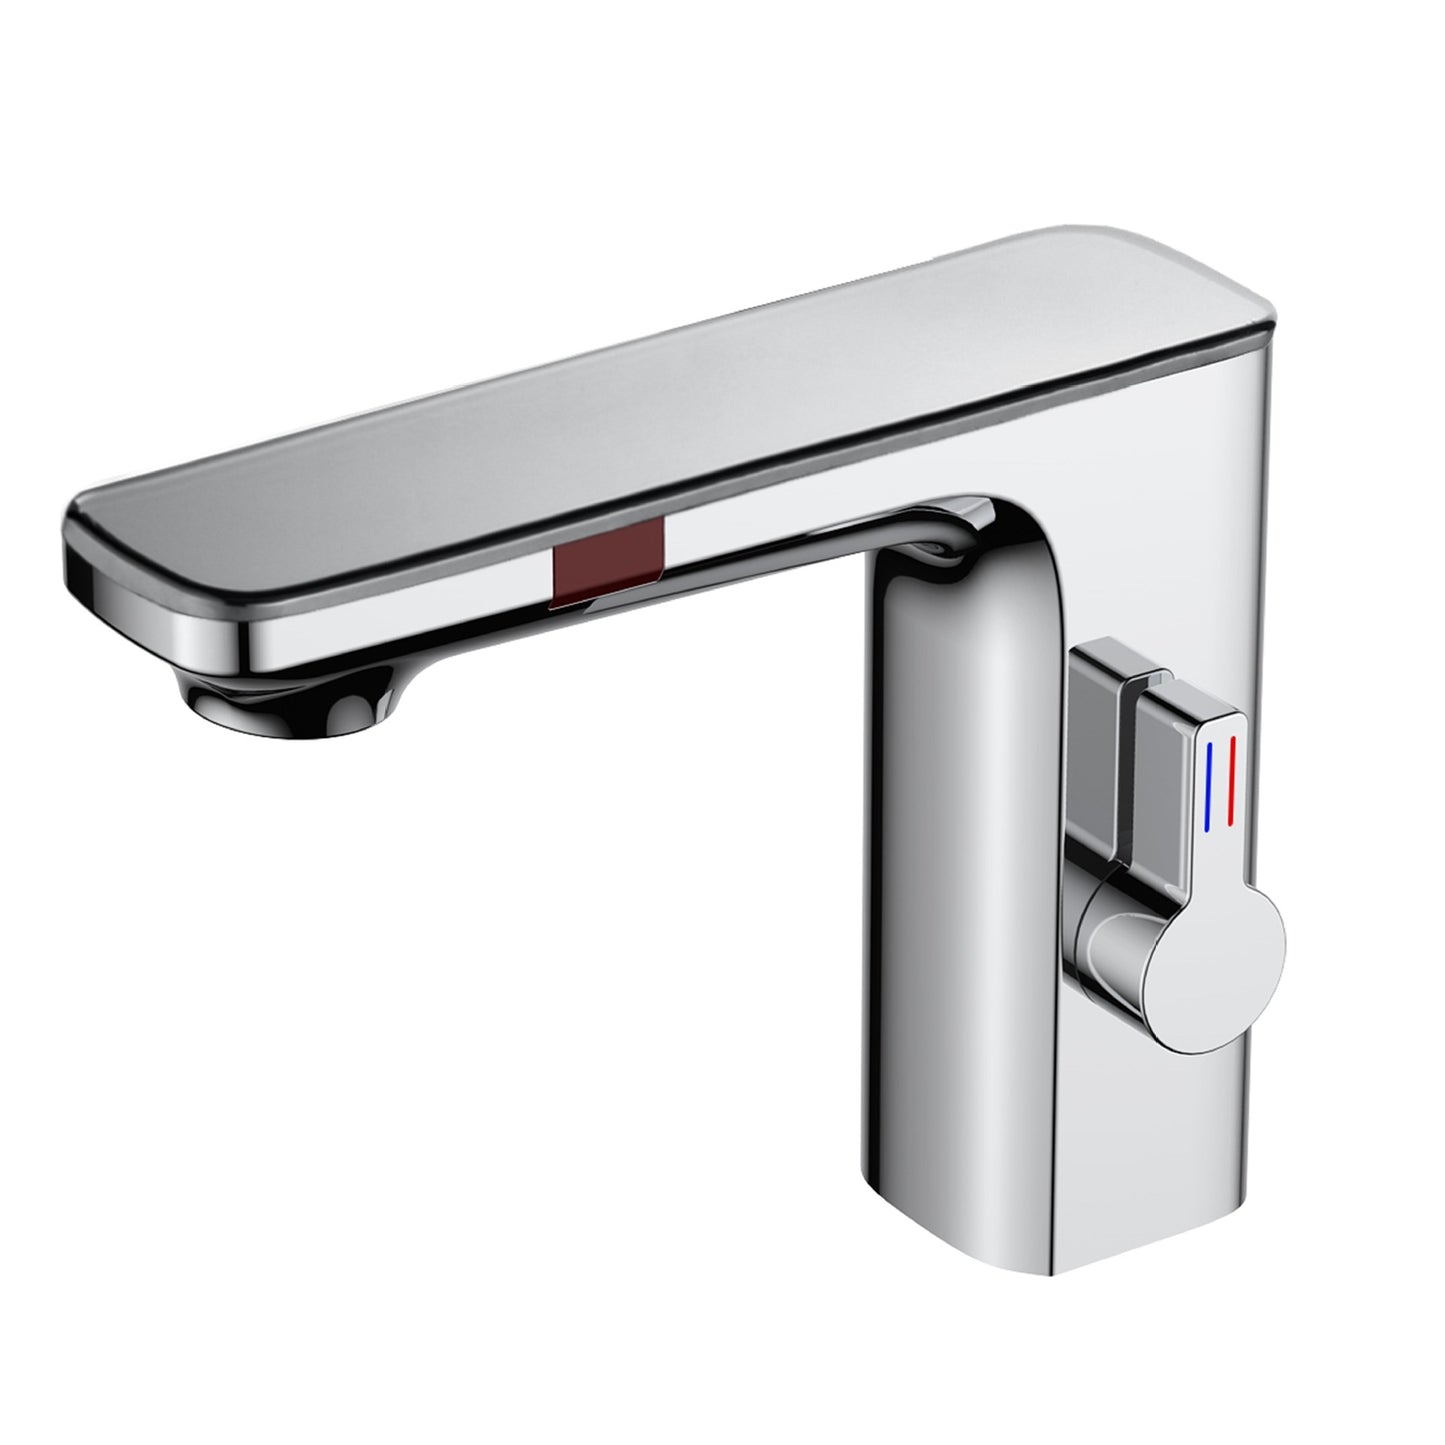 Digital Display Touchless Bathroom Faucet